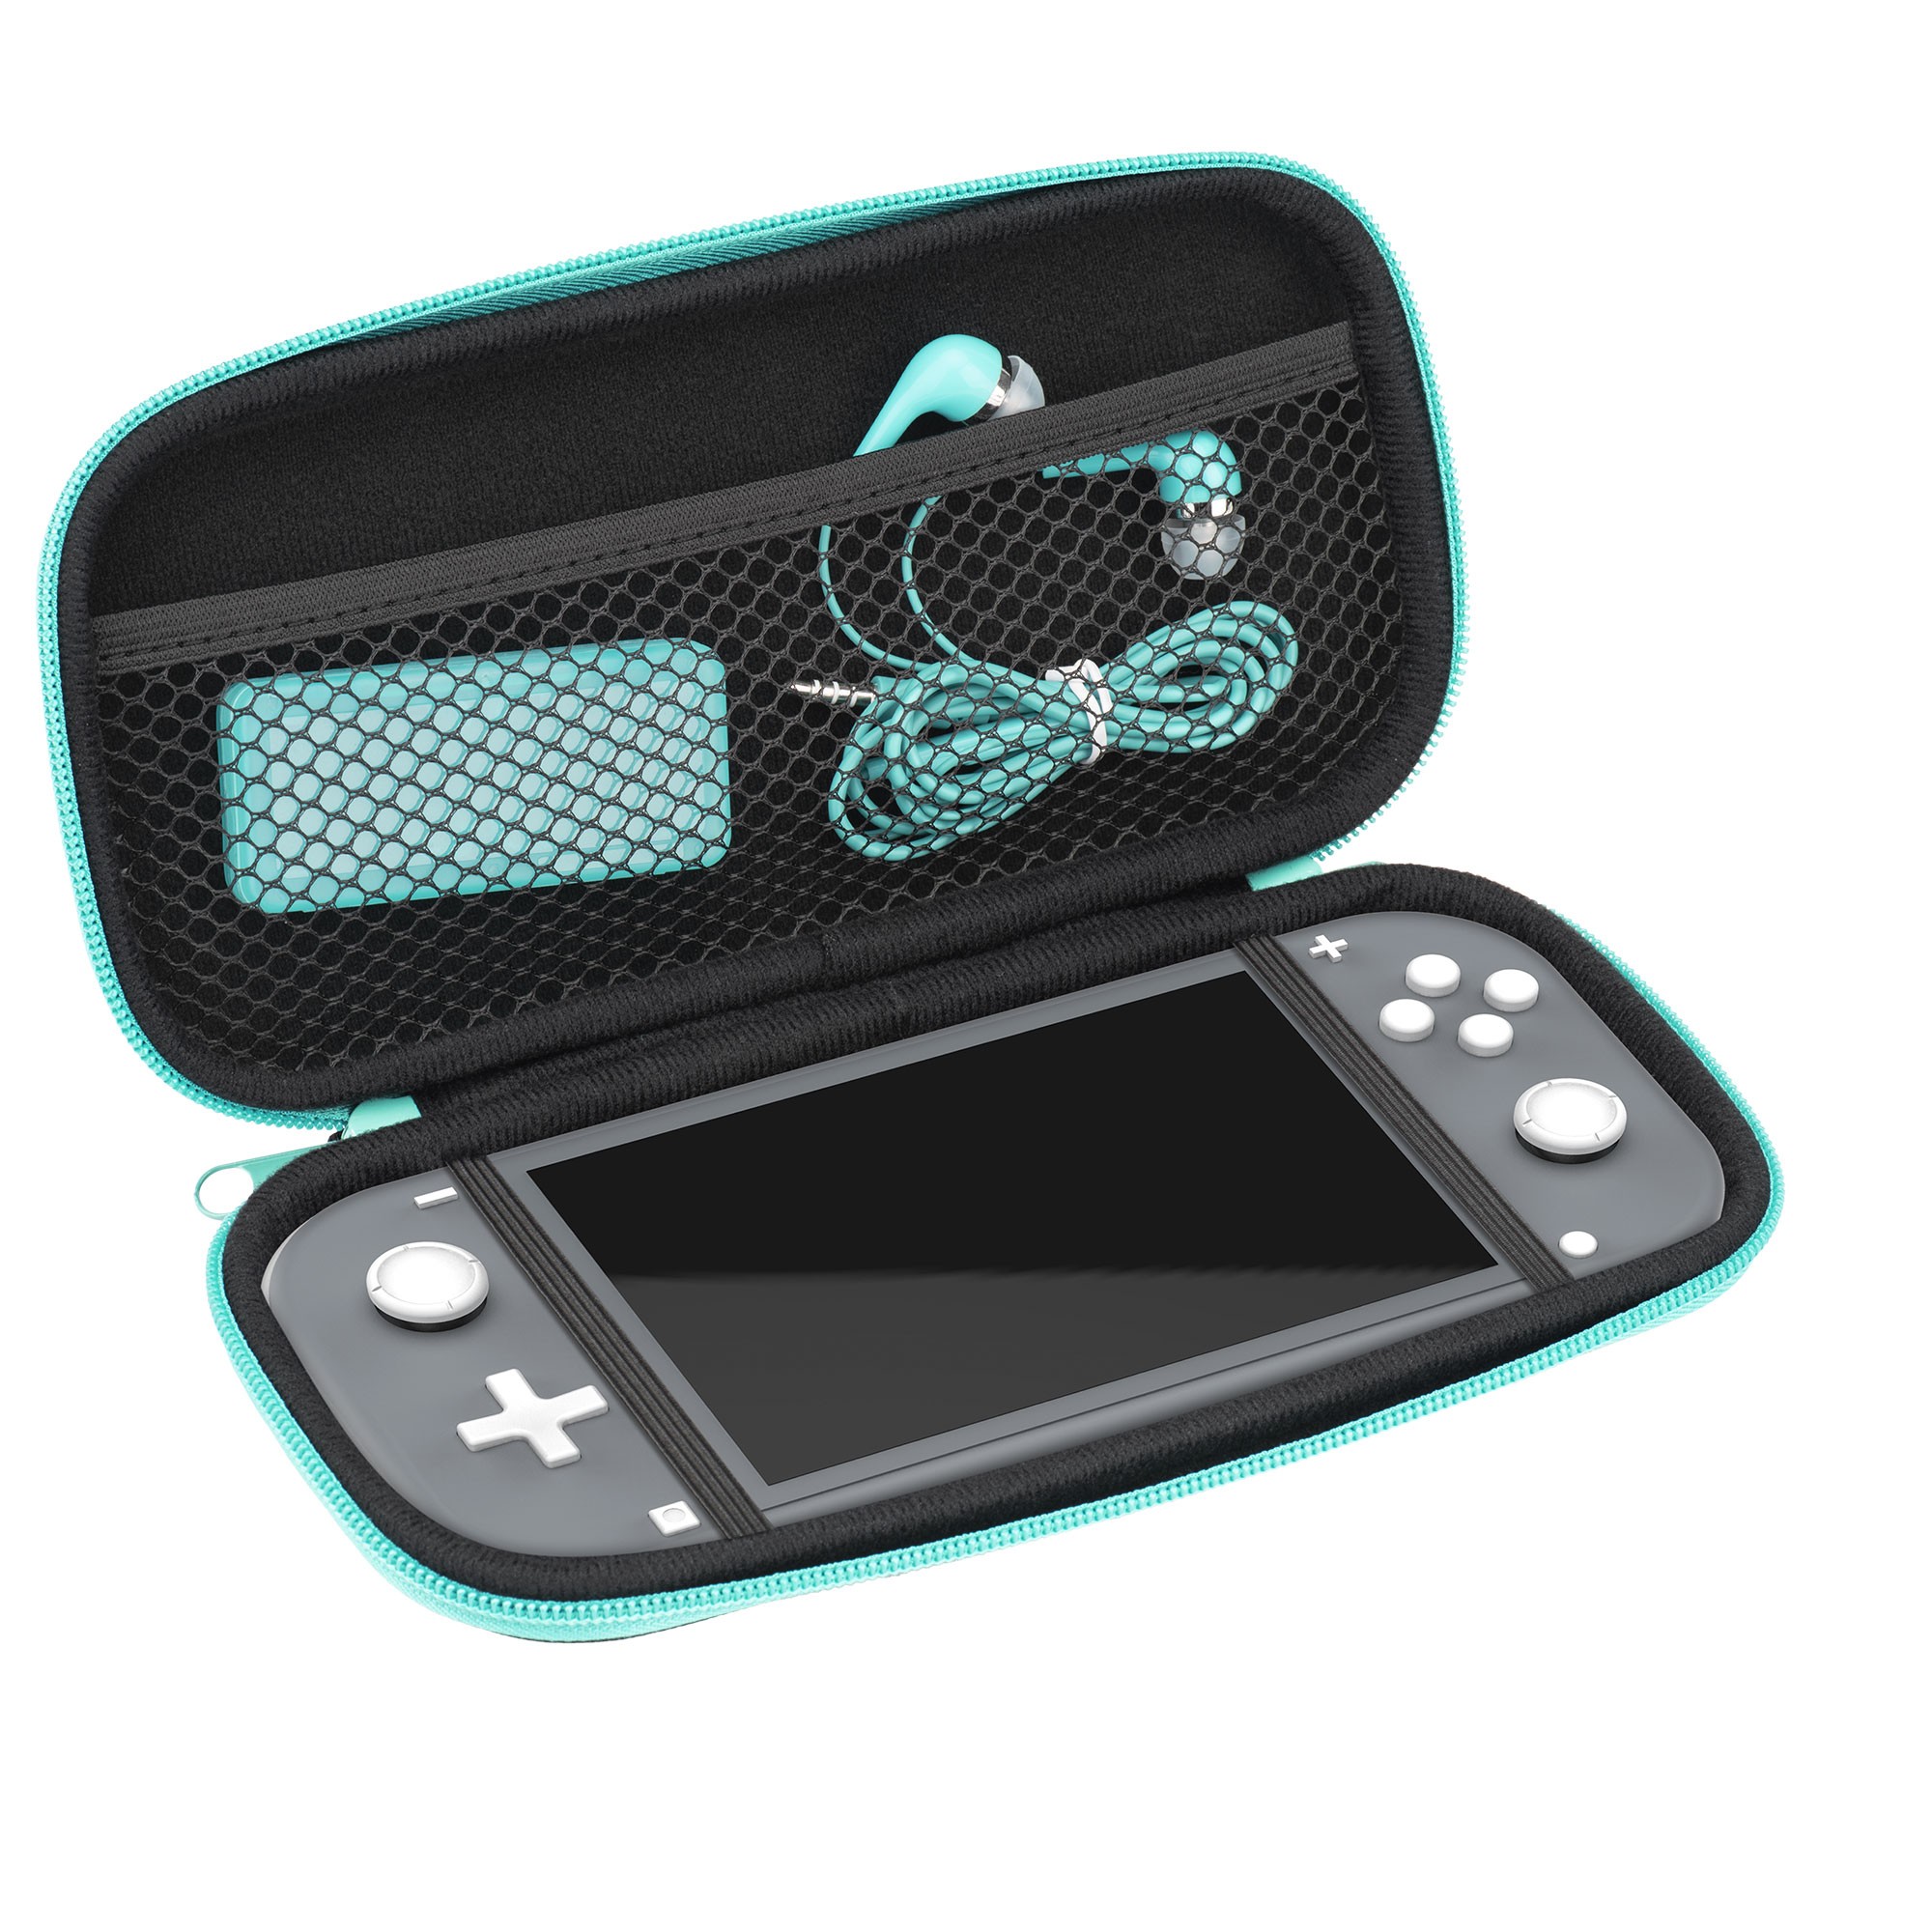 6 in 1 accessory kit for Nintendo Switch Lite | Subsonic